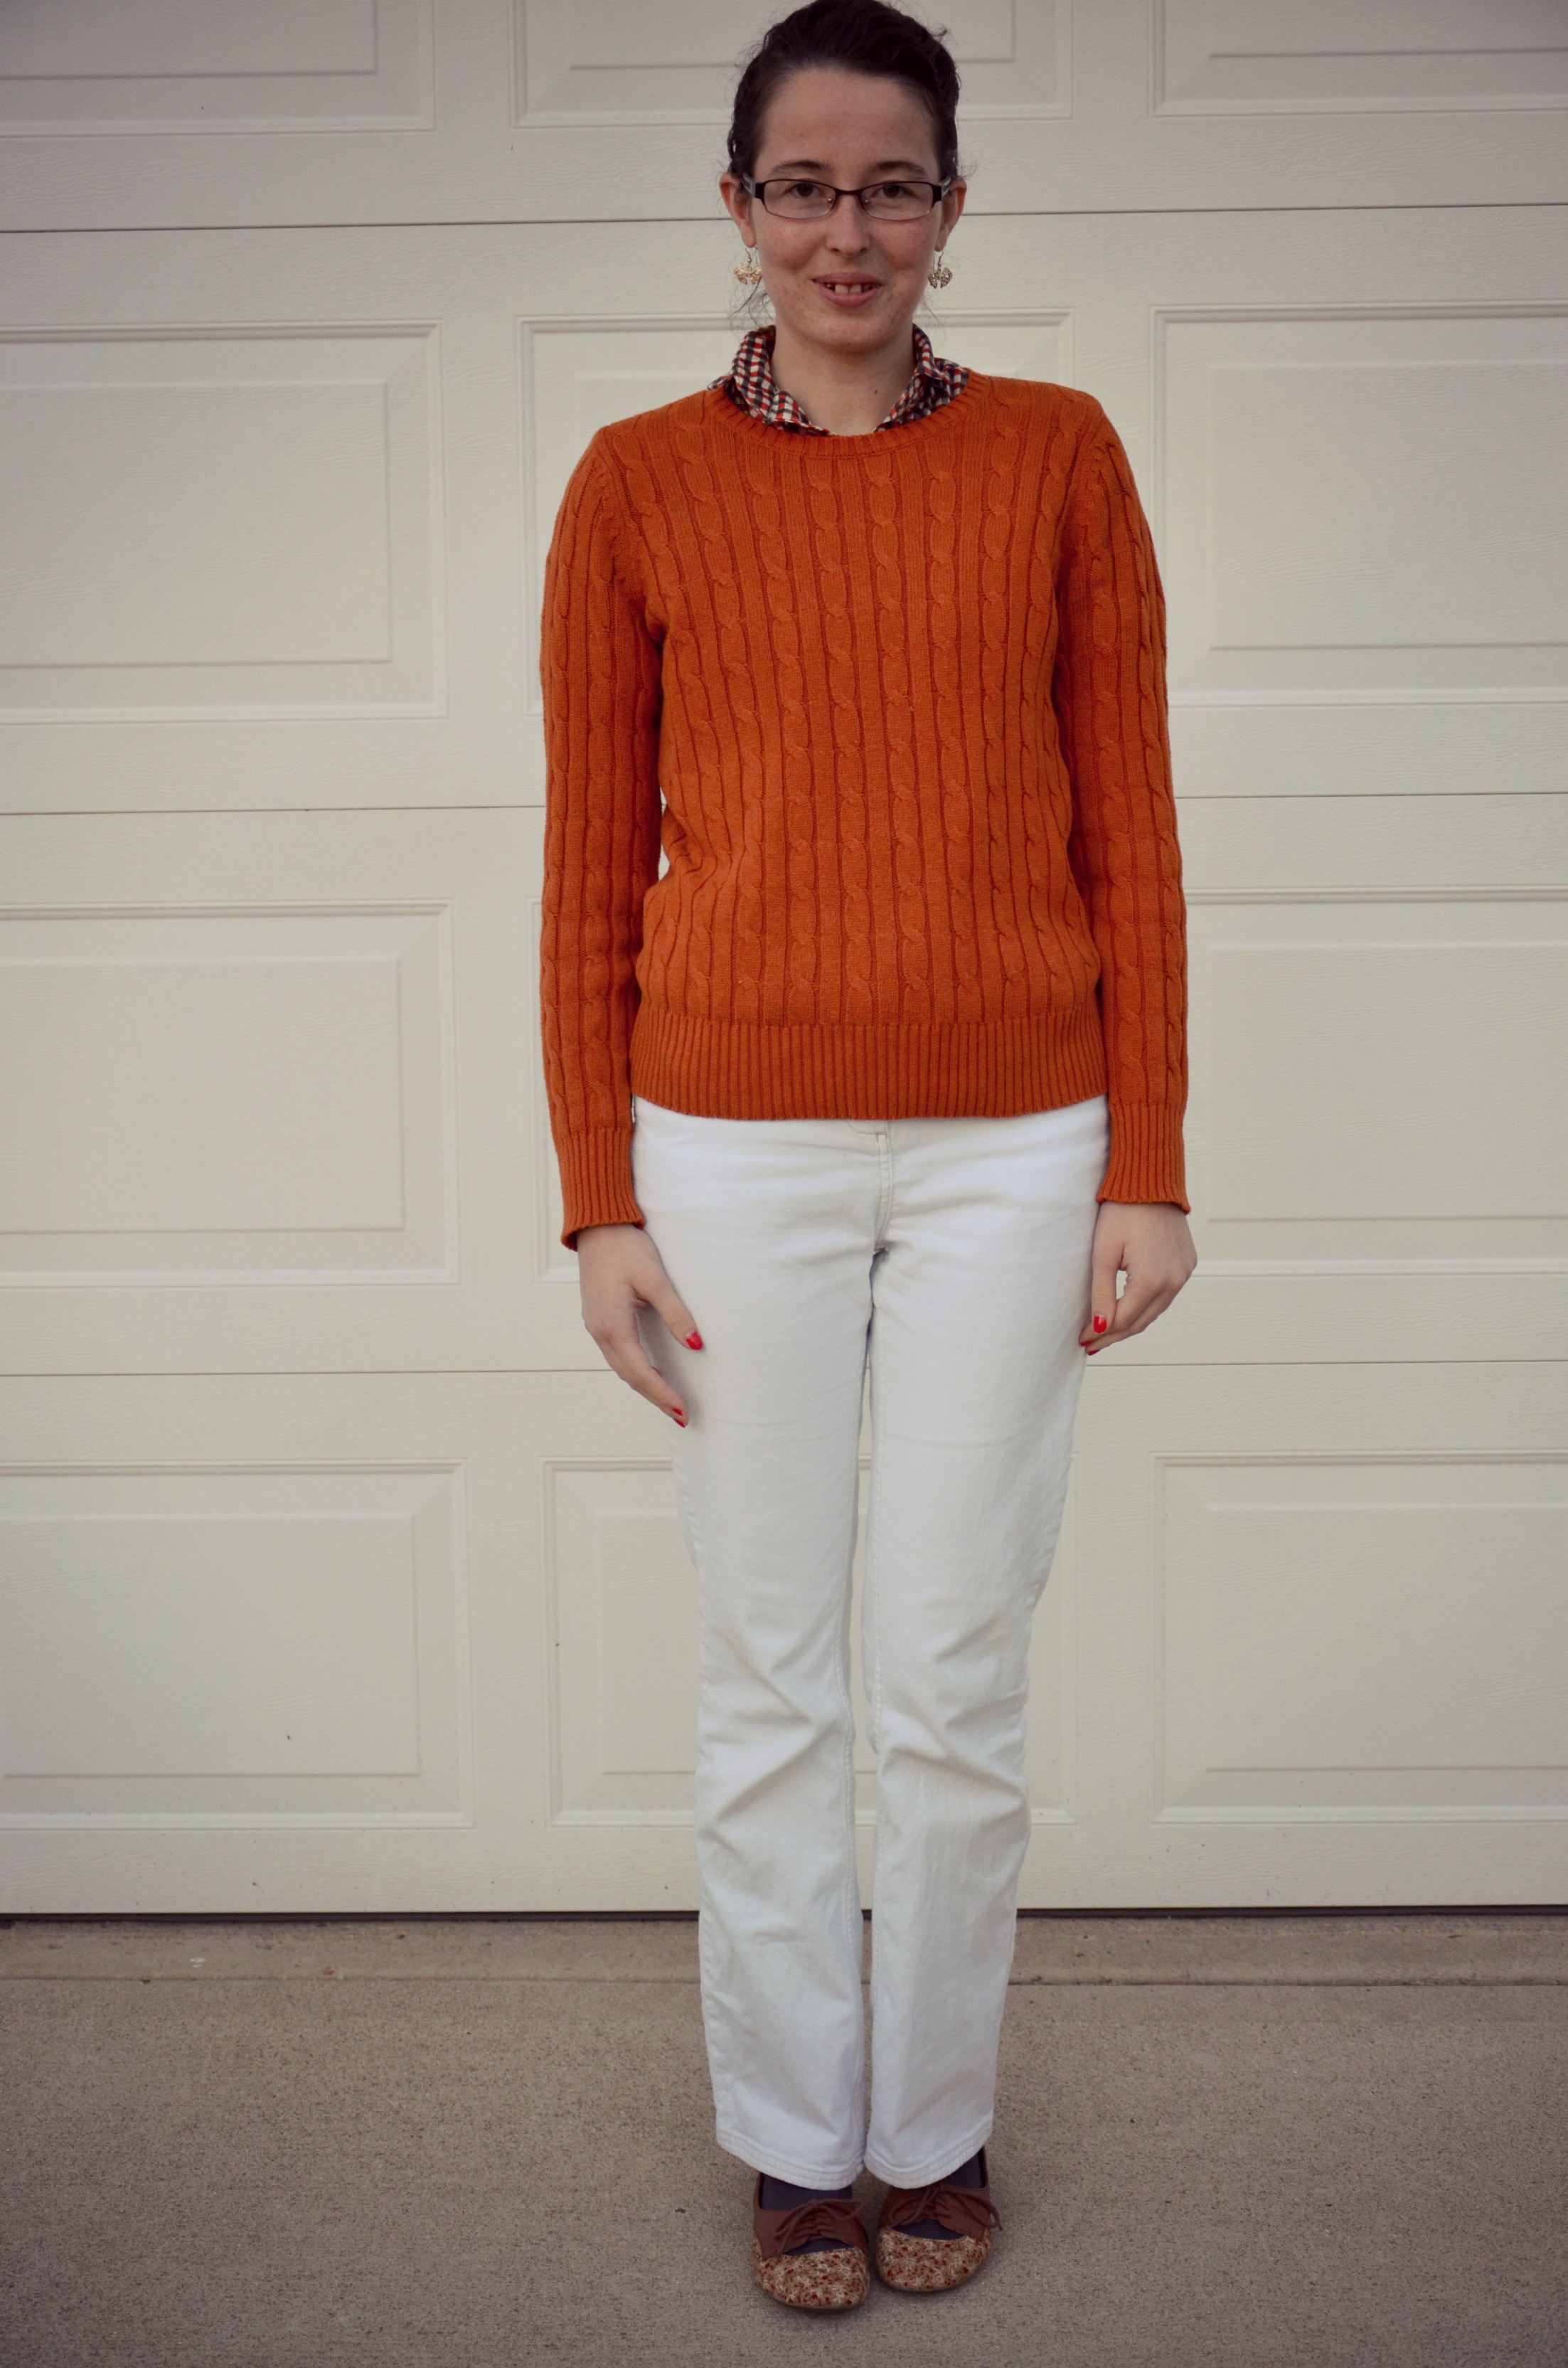 What I Wore - Time is Love ❘ Modest ❘ Fashion ❘ Fall ❘ Wearing White Jeans in the Fall ❘ Boden